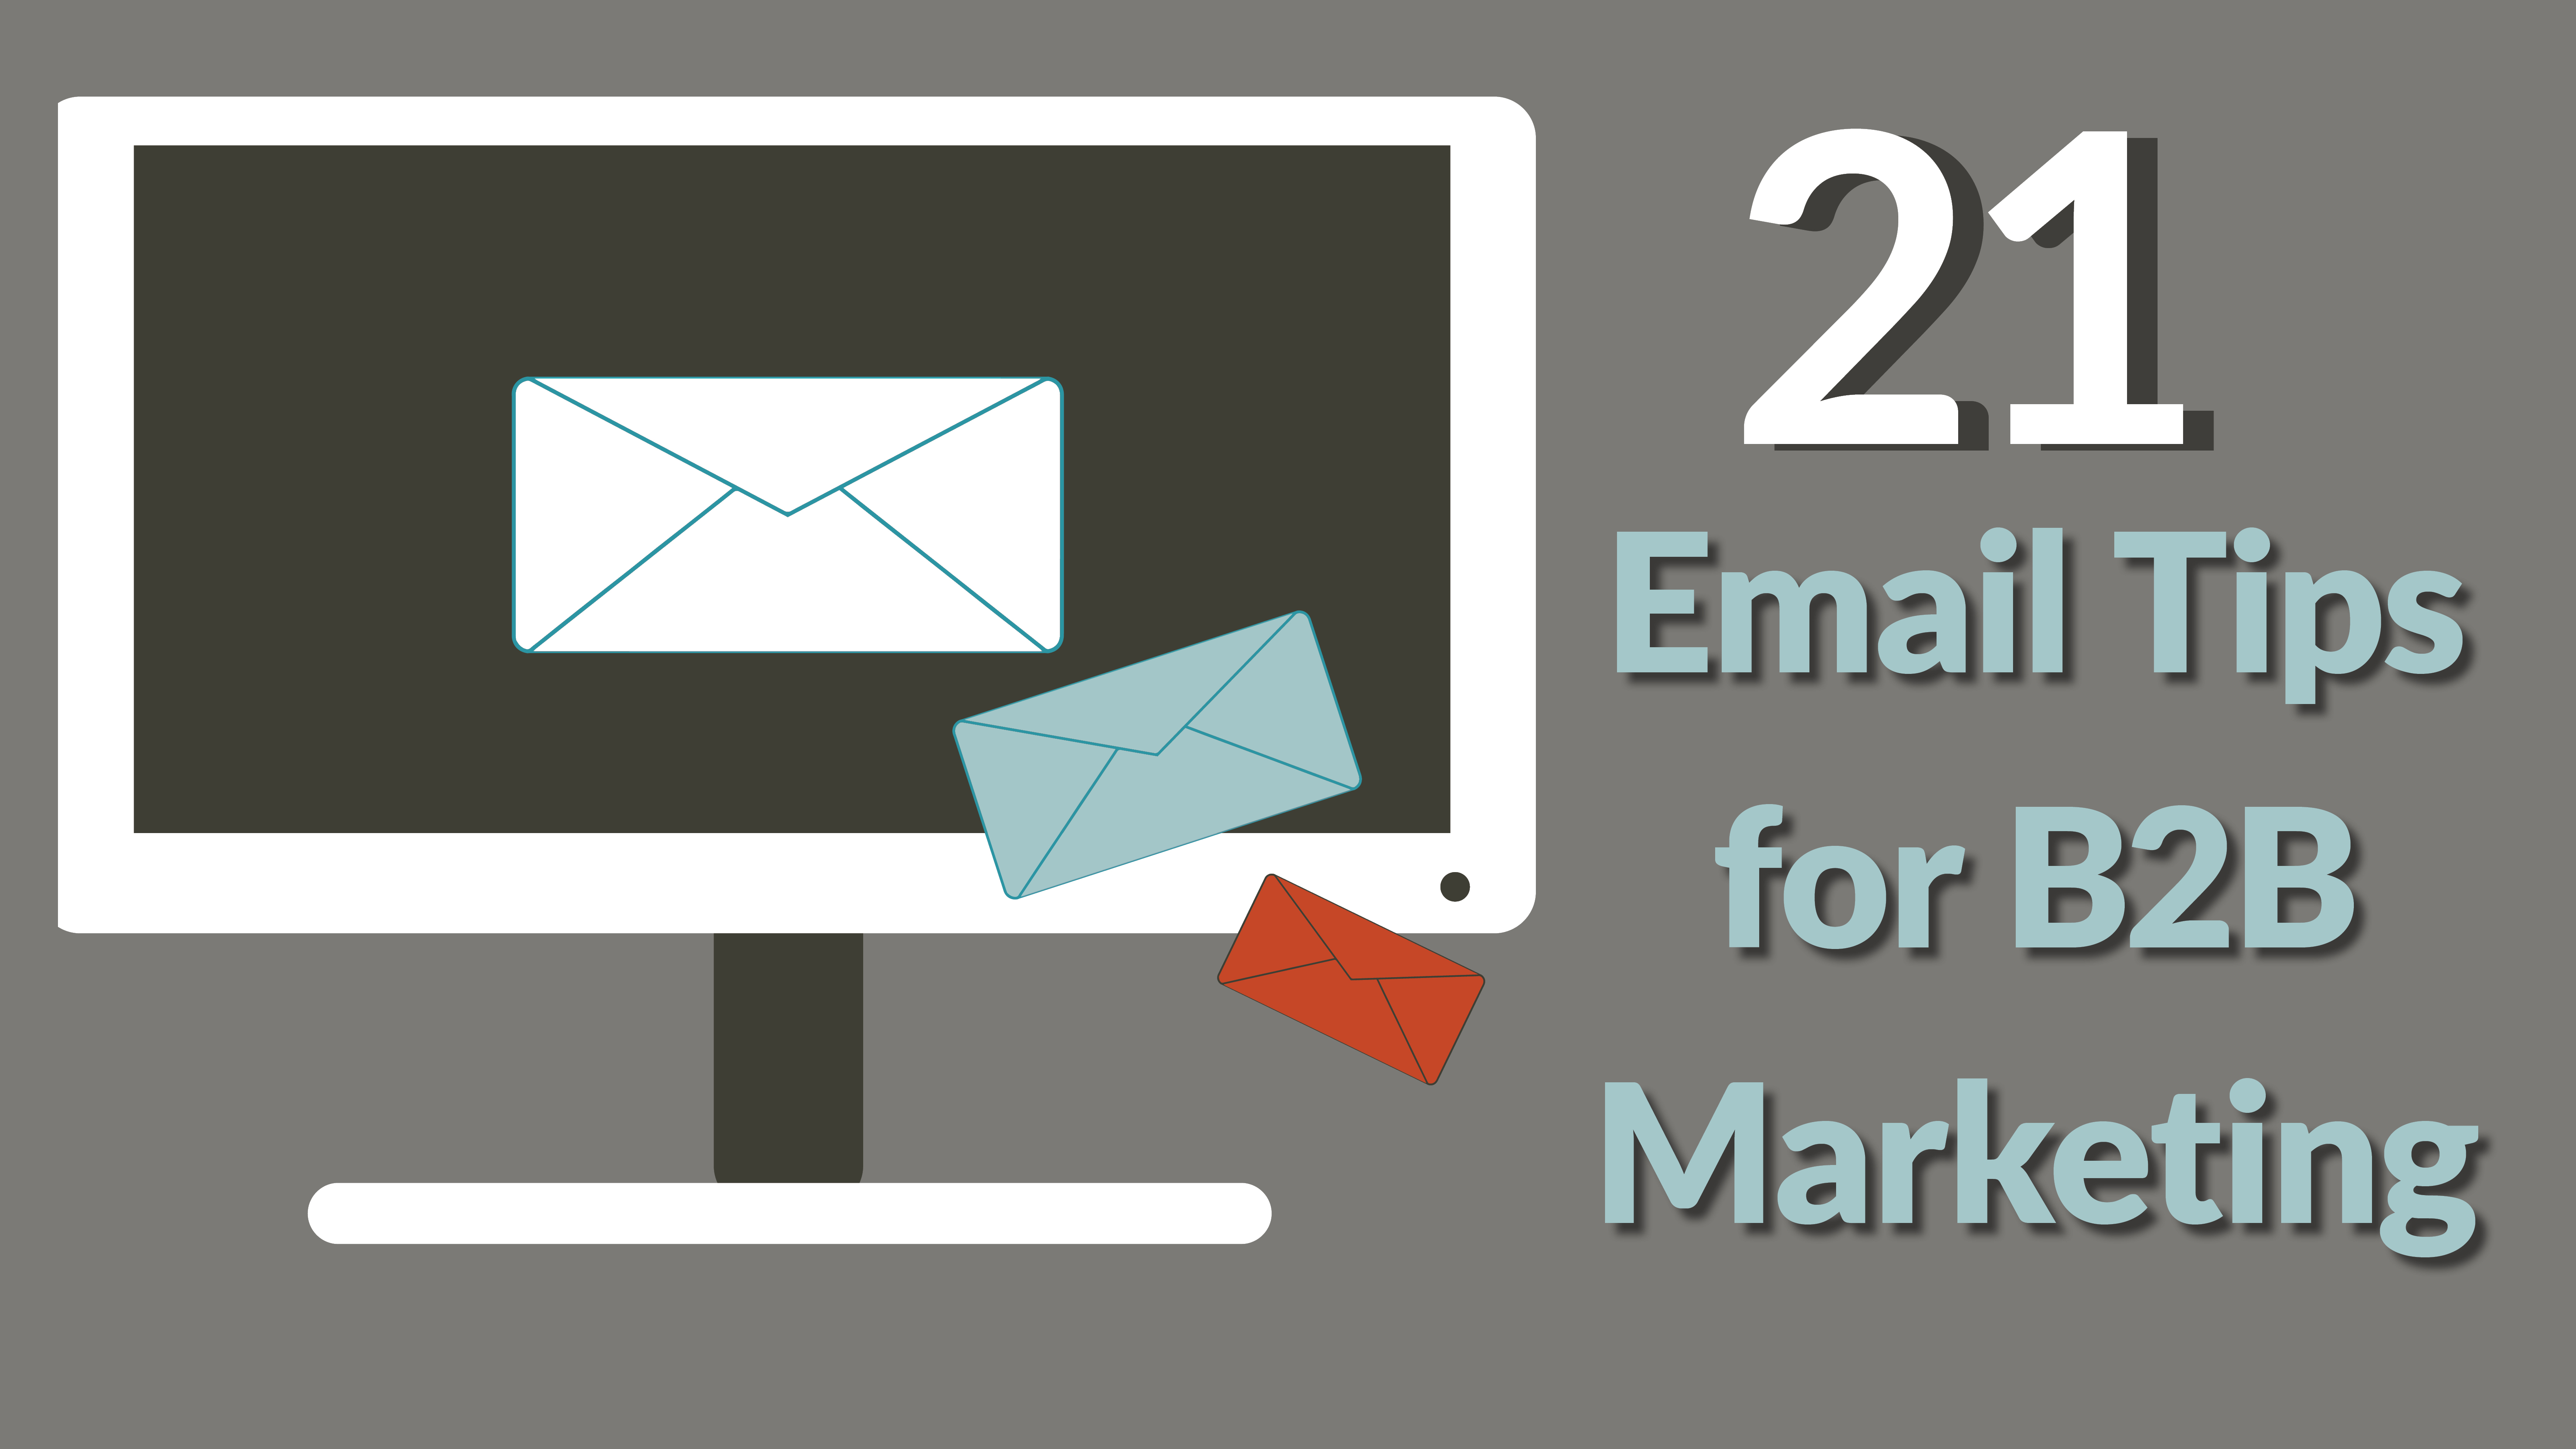 21 Email Tips for B2B Marketing